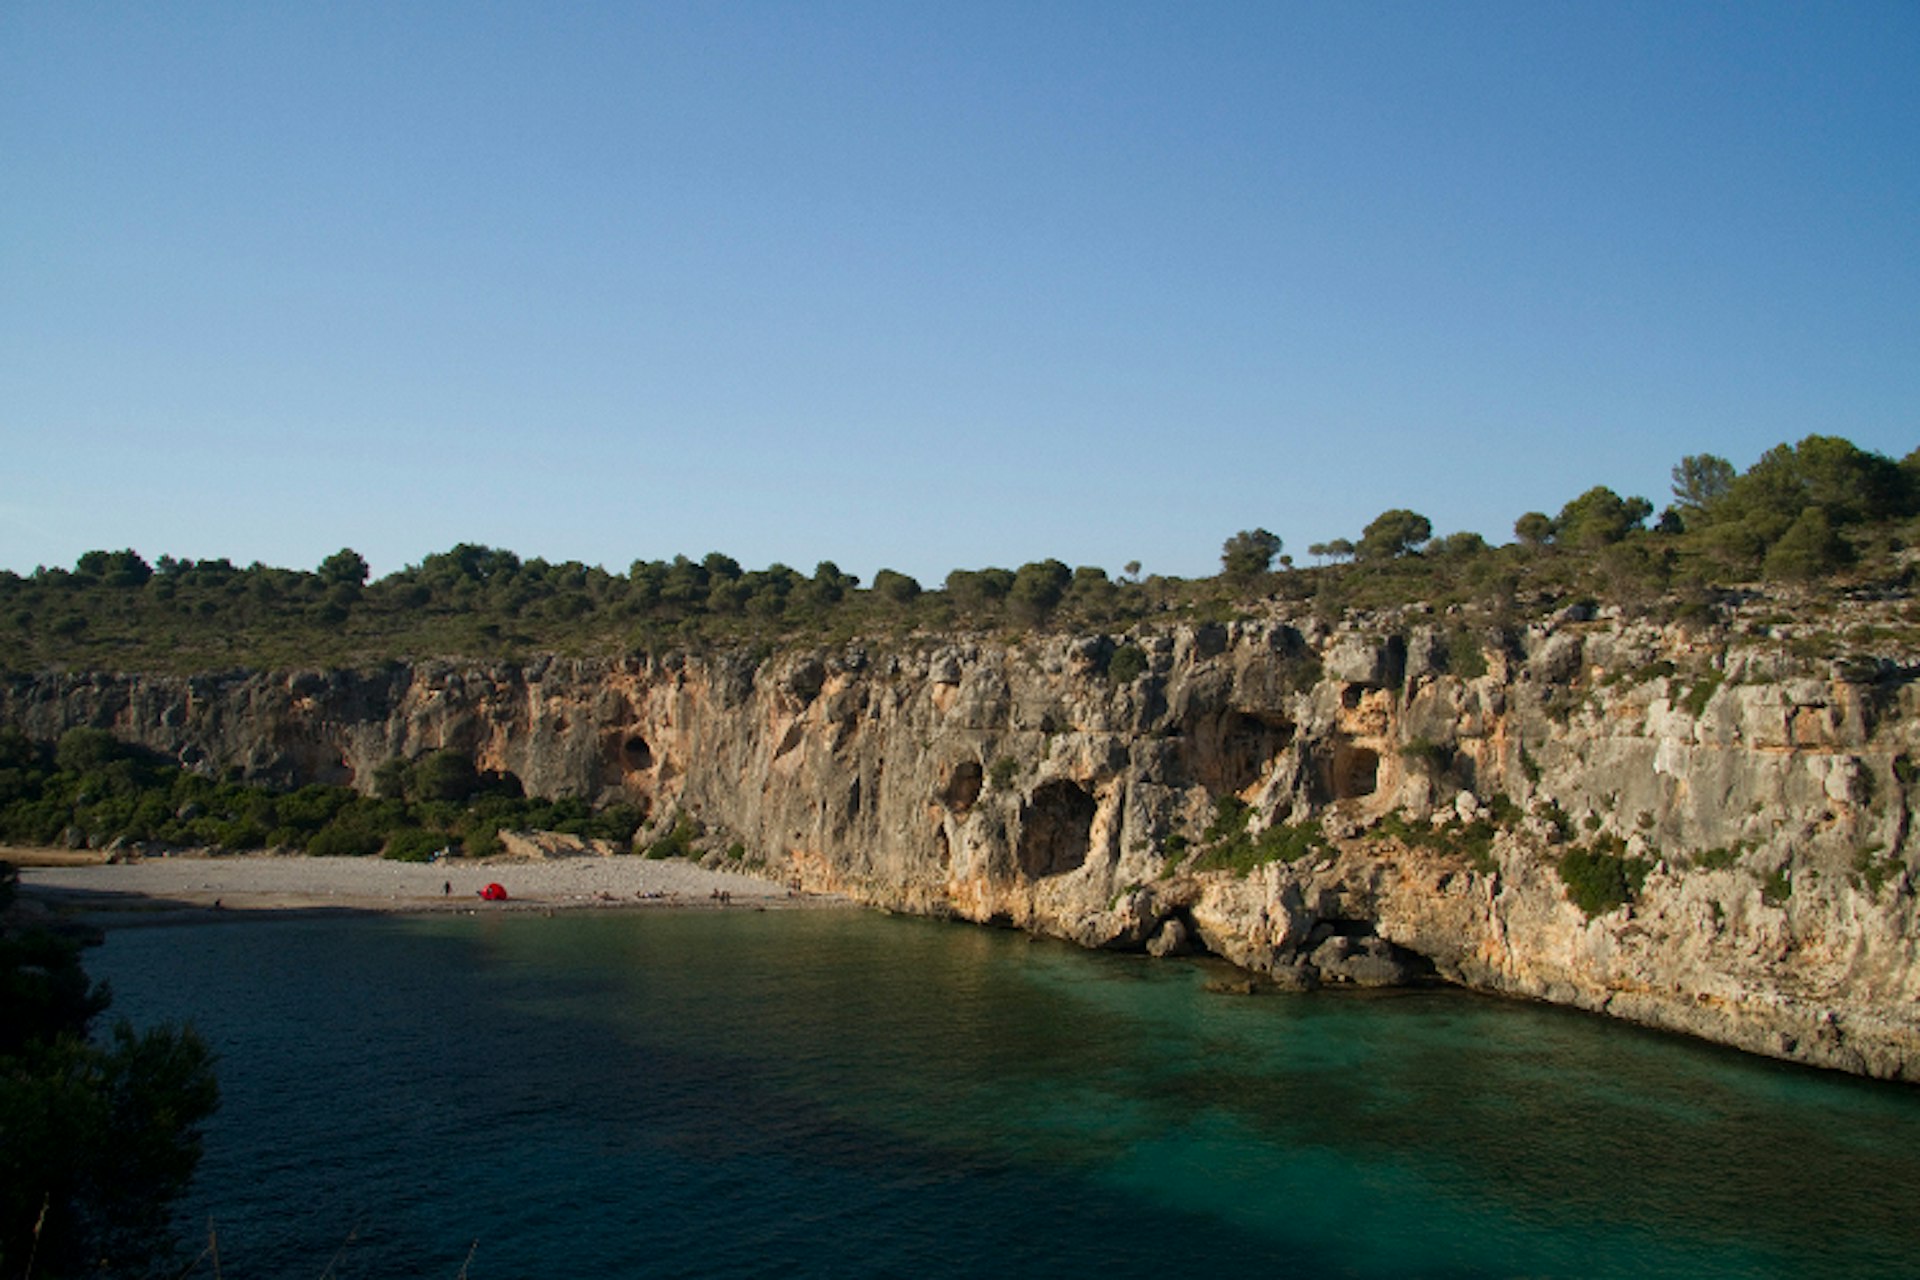 Explore quiet bays near Cales de Mallorca on the east coast. Image by Kerry Christiani / Lonely Planet